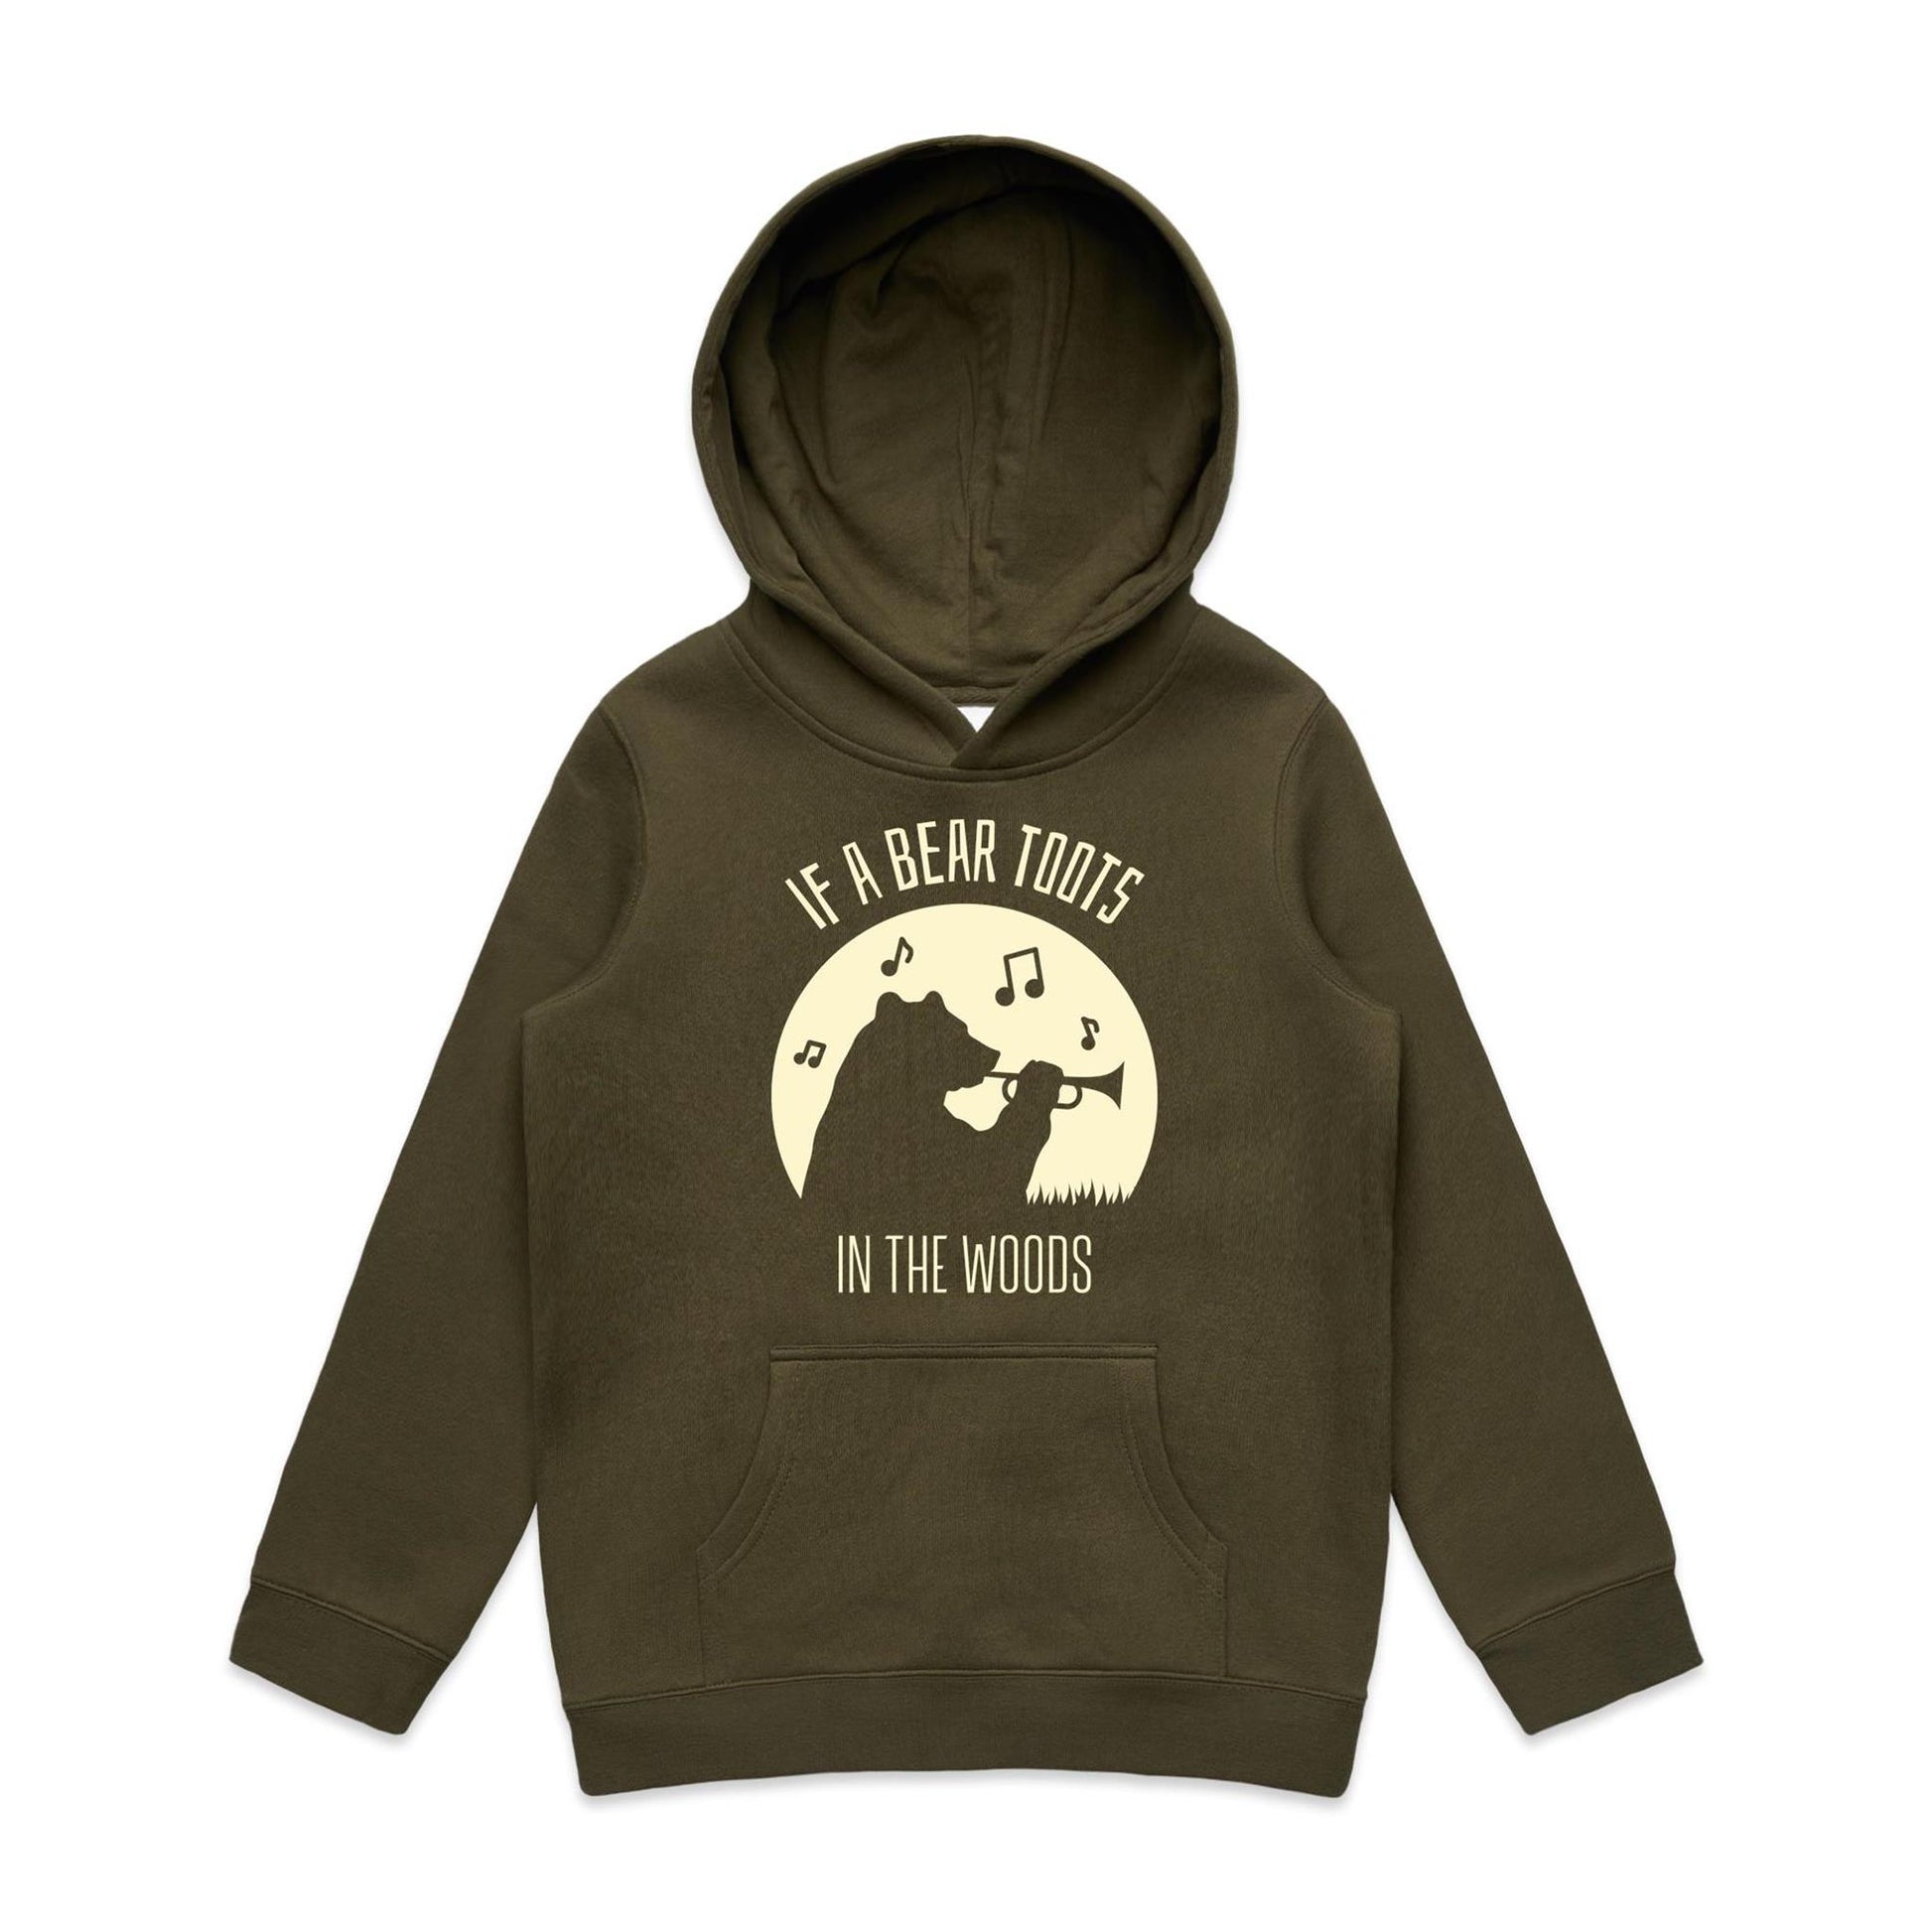 If A Bear Toots In The Woods, Trumpet Player - Youth Supply Hood Army Kids Hoodie